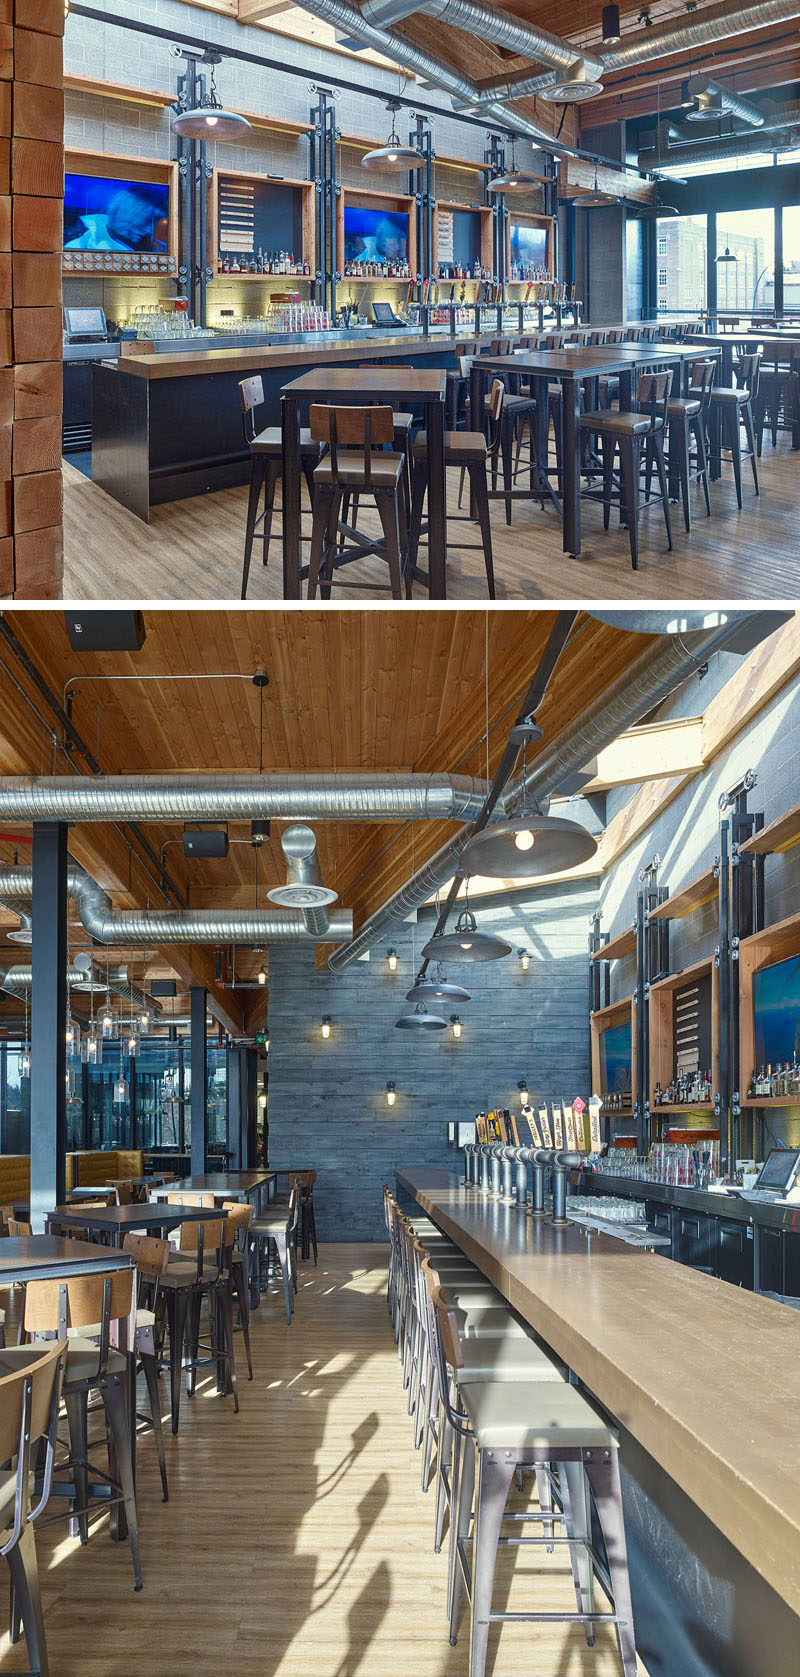 This brew pub bar features pipe-style taps and is brightened by a skylight directly above it.